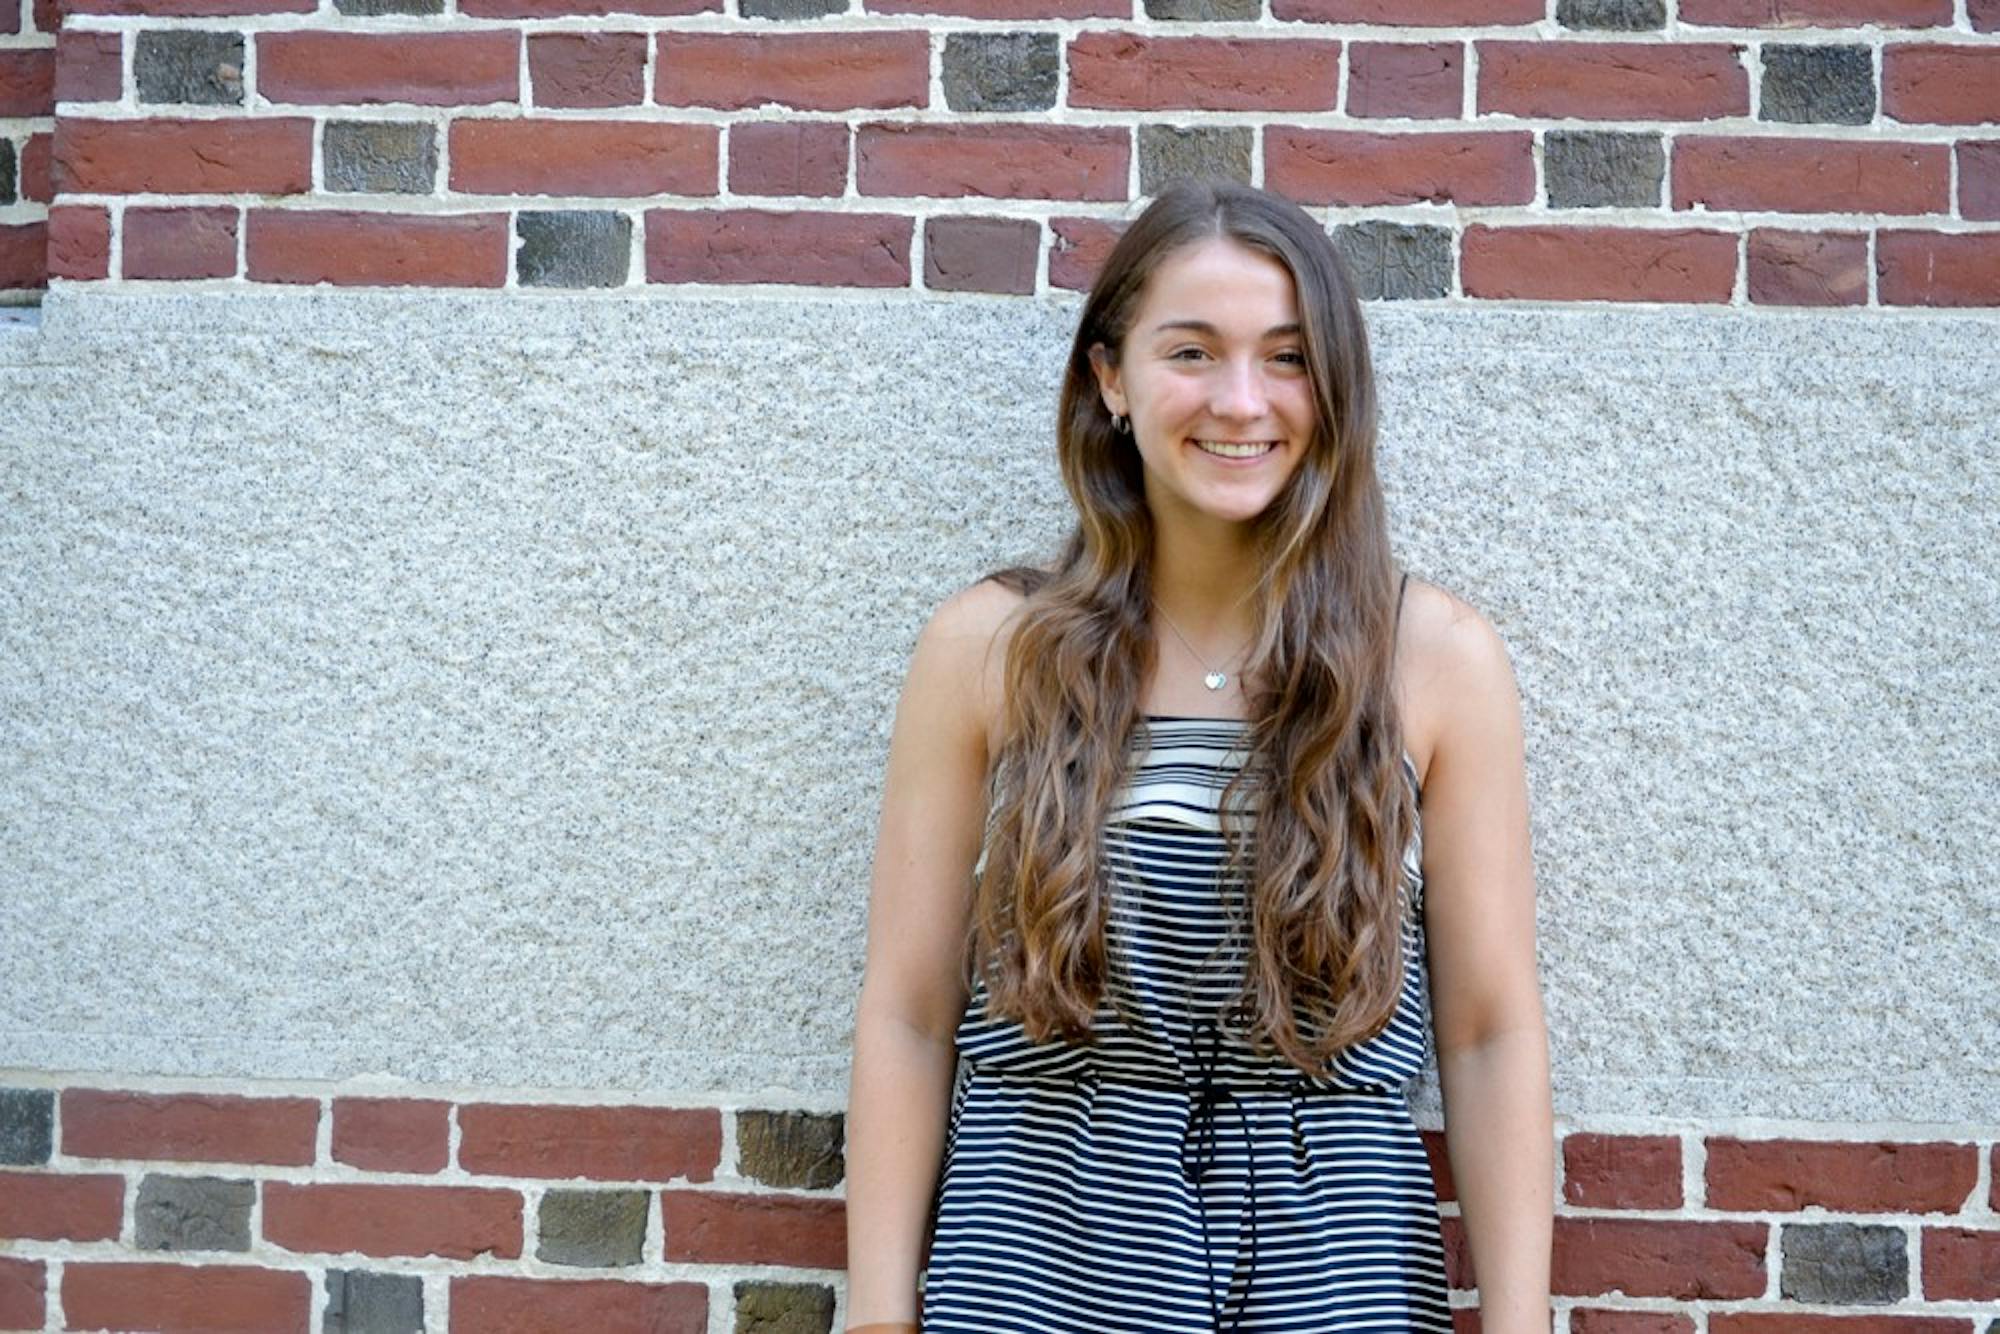 Julianna Docking '18 hopes to meet new people and try being uncomfortable during her next few years.